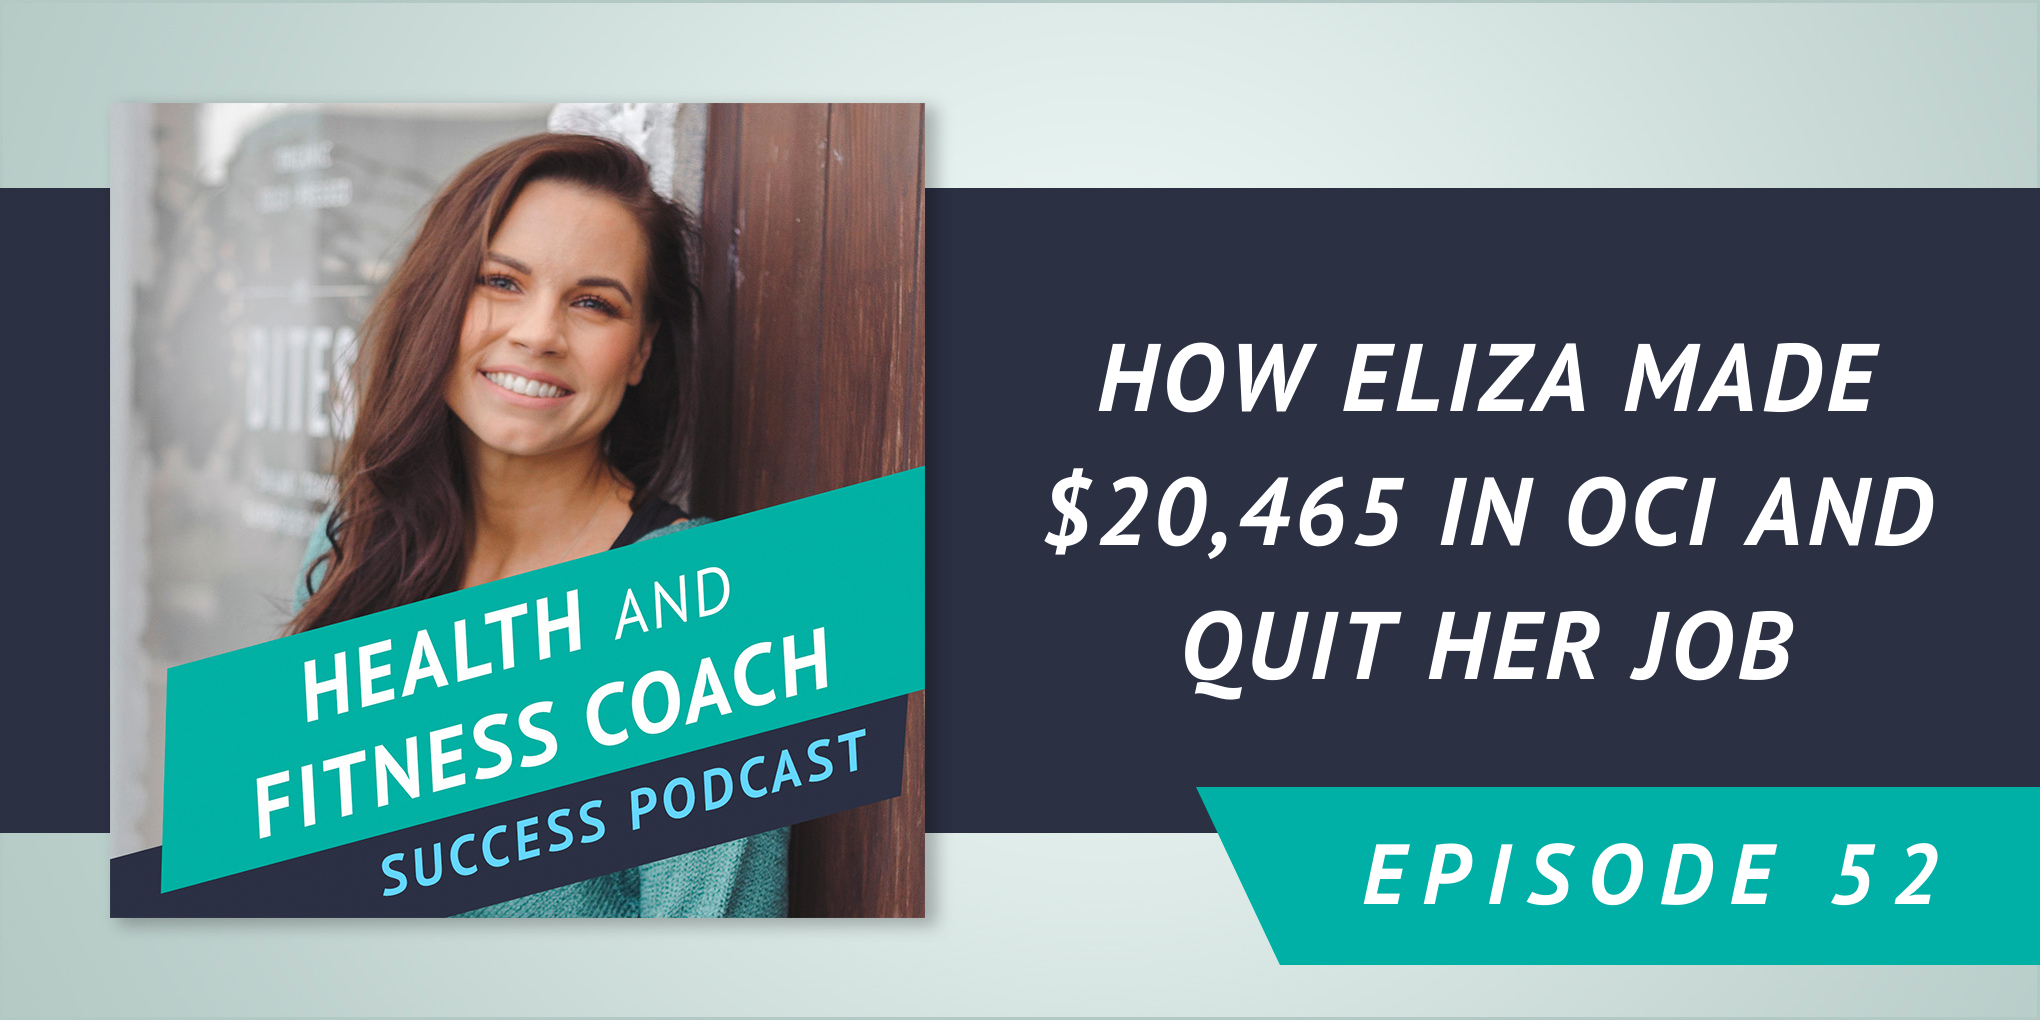 How Eliza Made $20,465 in OCI and Quit Her Job